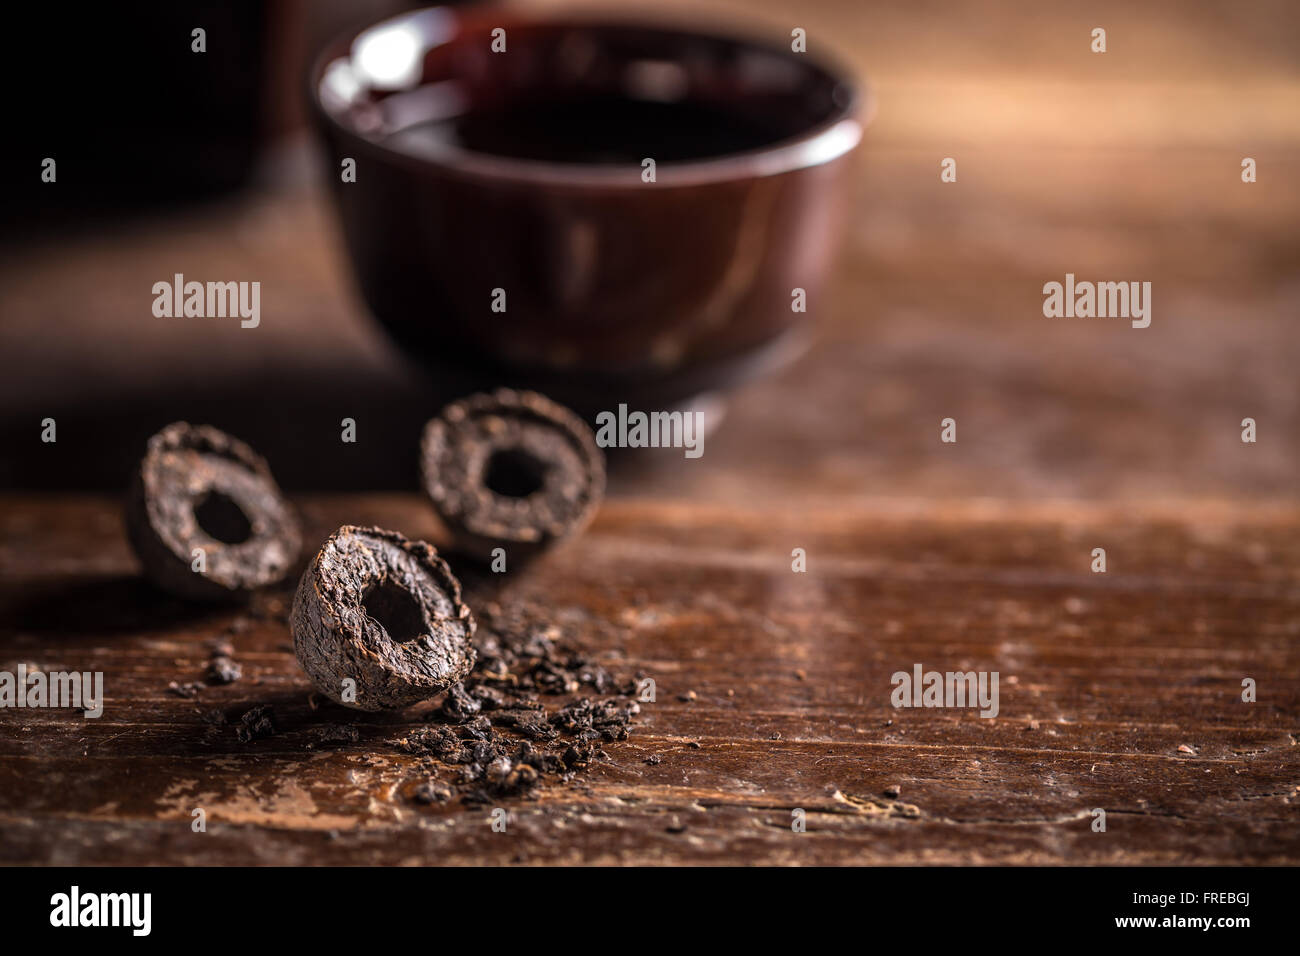 Pressed black pu-erh tea with space for text Stock Photo